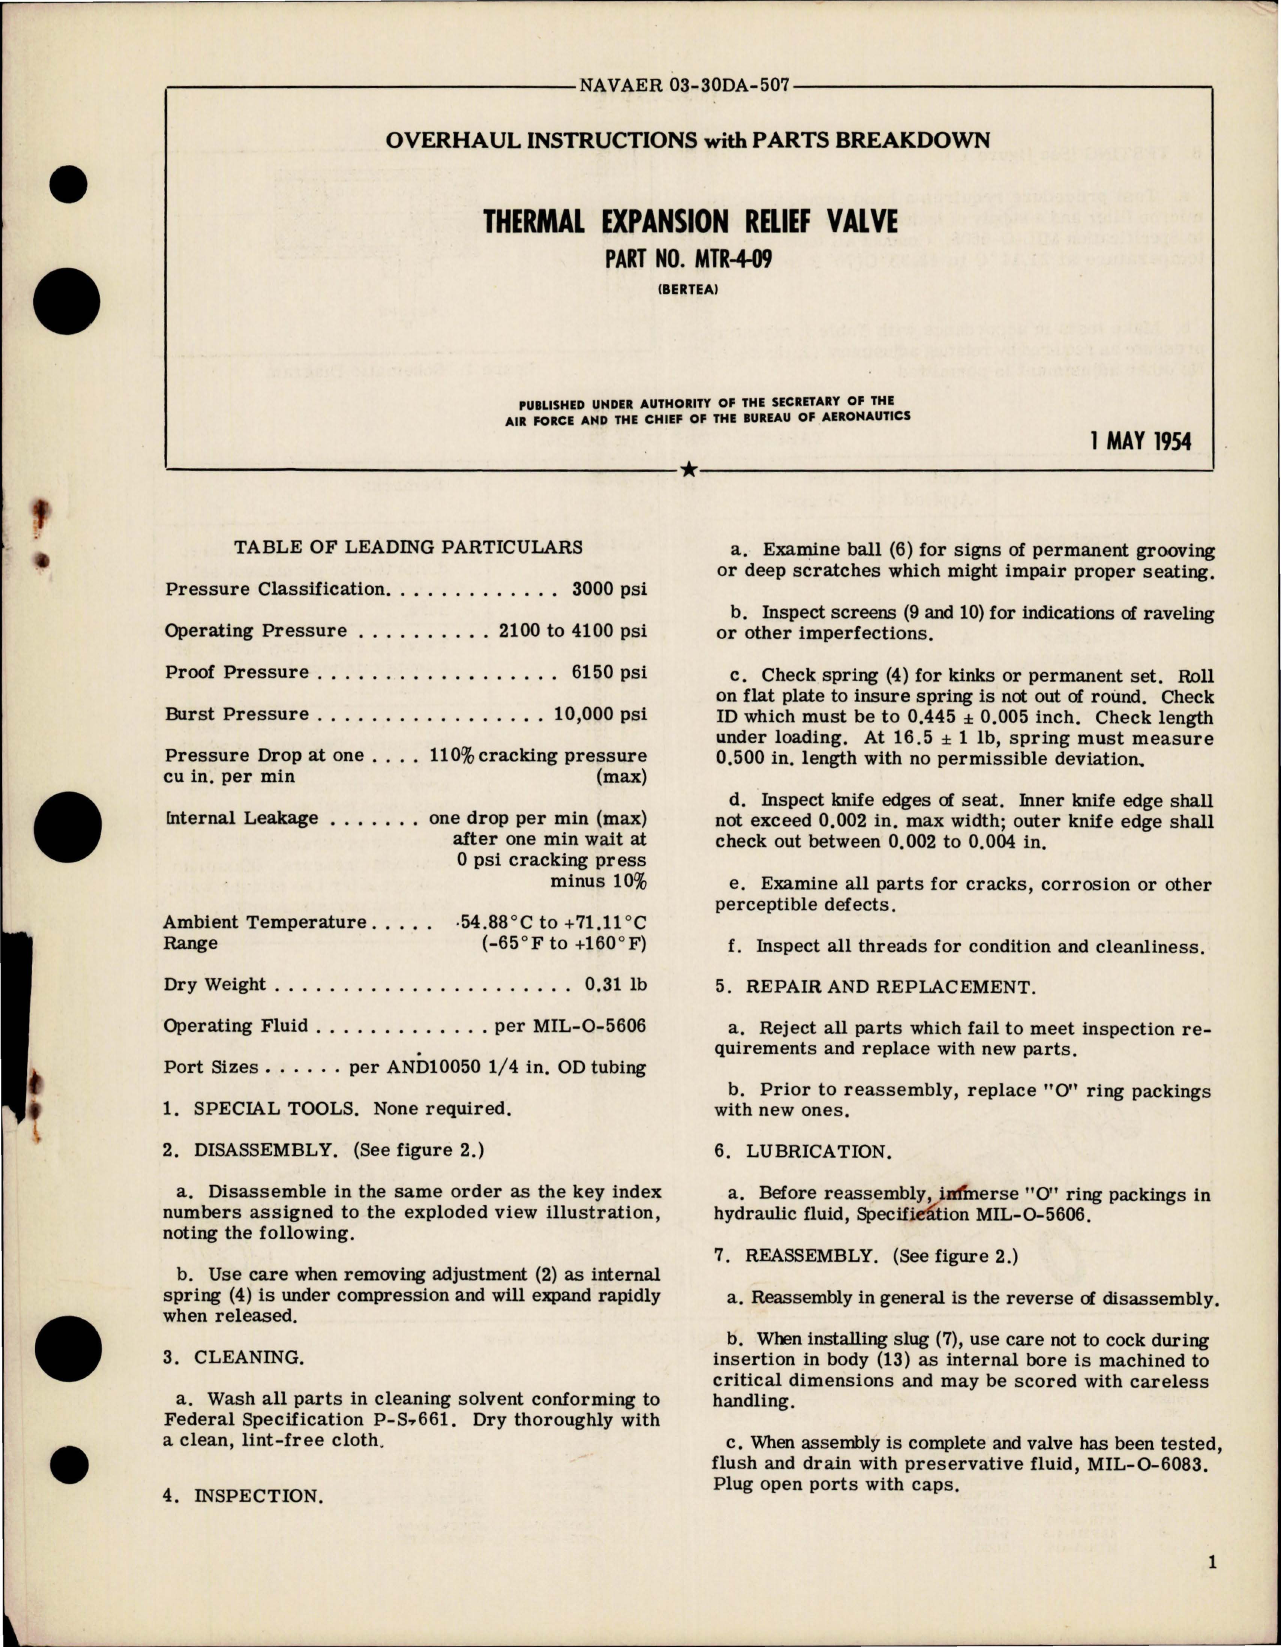 Sample page 1 from AirCorps Library document: Overhaul Instructions with Parts Breakdown for Thermal Expansion Relief Valve - Part MTR-4-09 